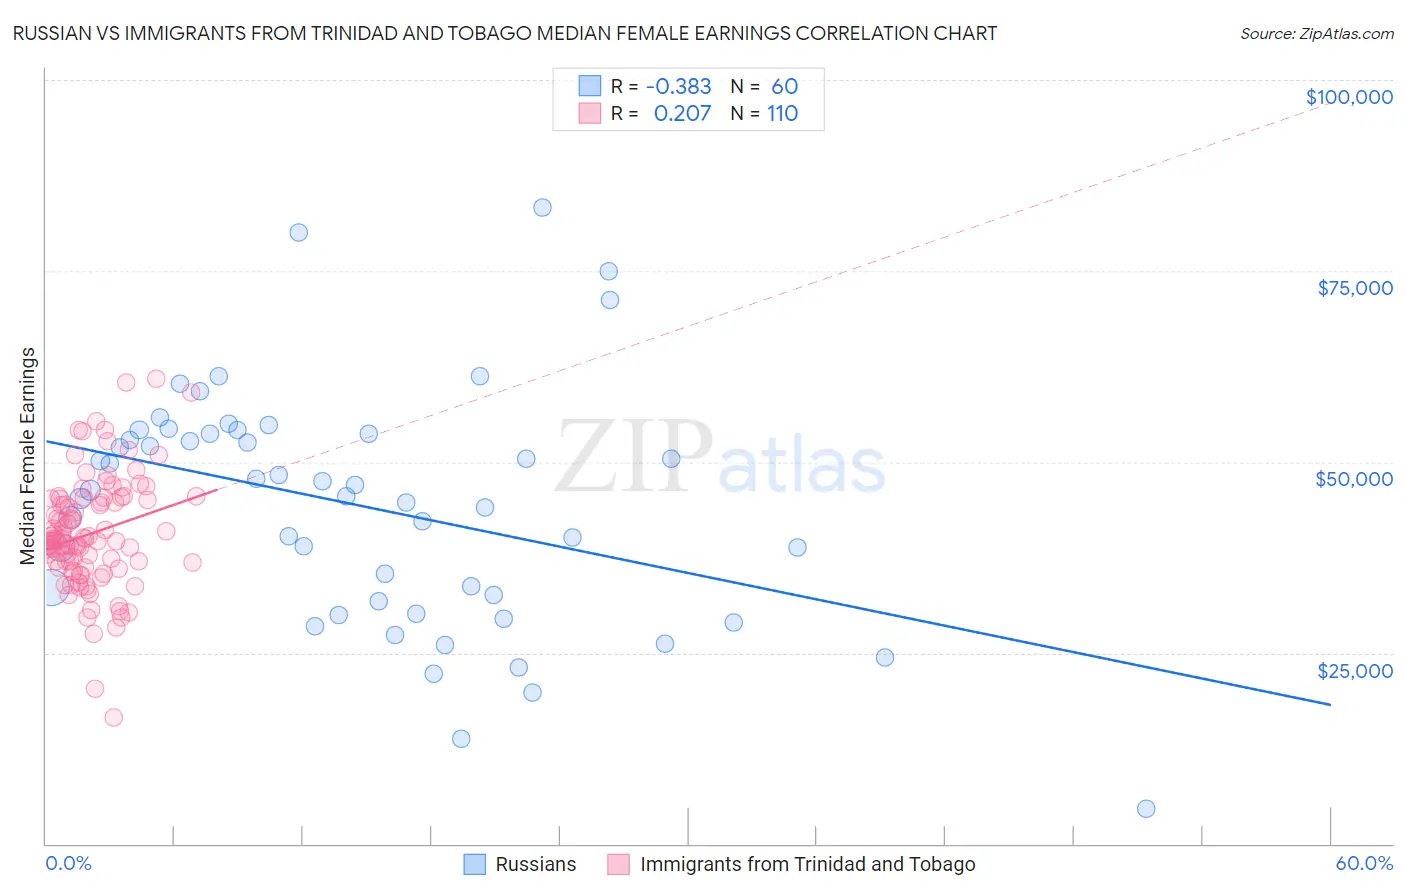 Russian vs Immigrants from Trinidad and Tobago Median Female Earnings